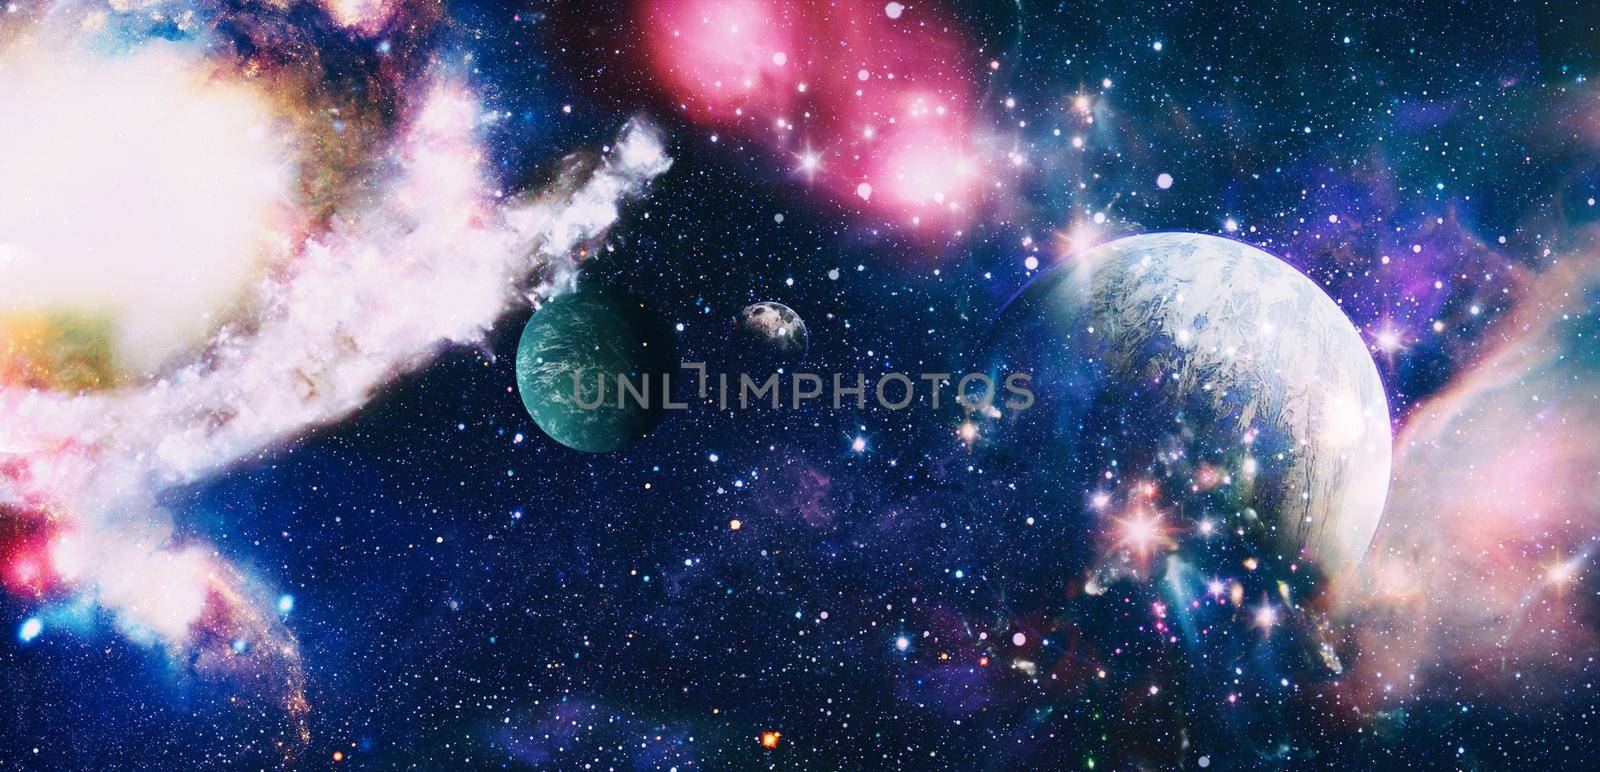 Outer space showing the beauty of space exploration. Distant galaxy. Abstract image. Elements of this image furnished by NASA